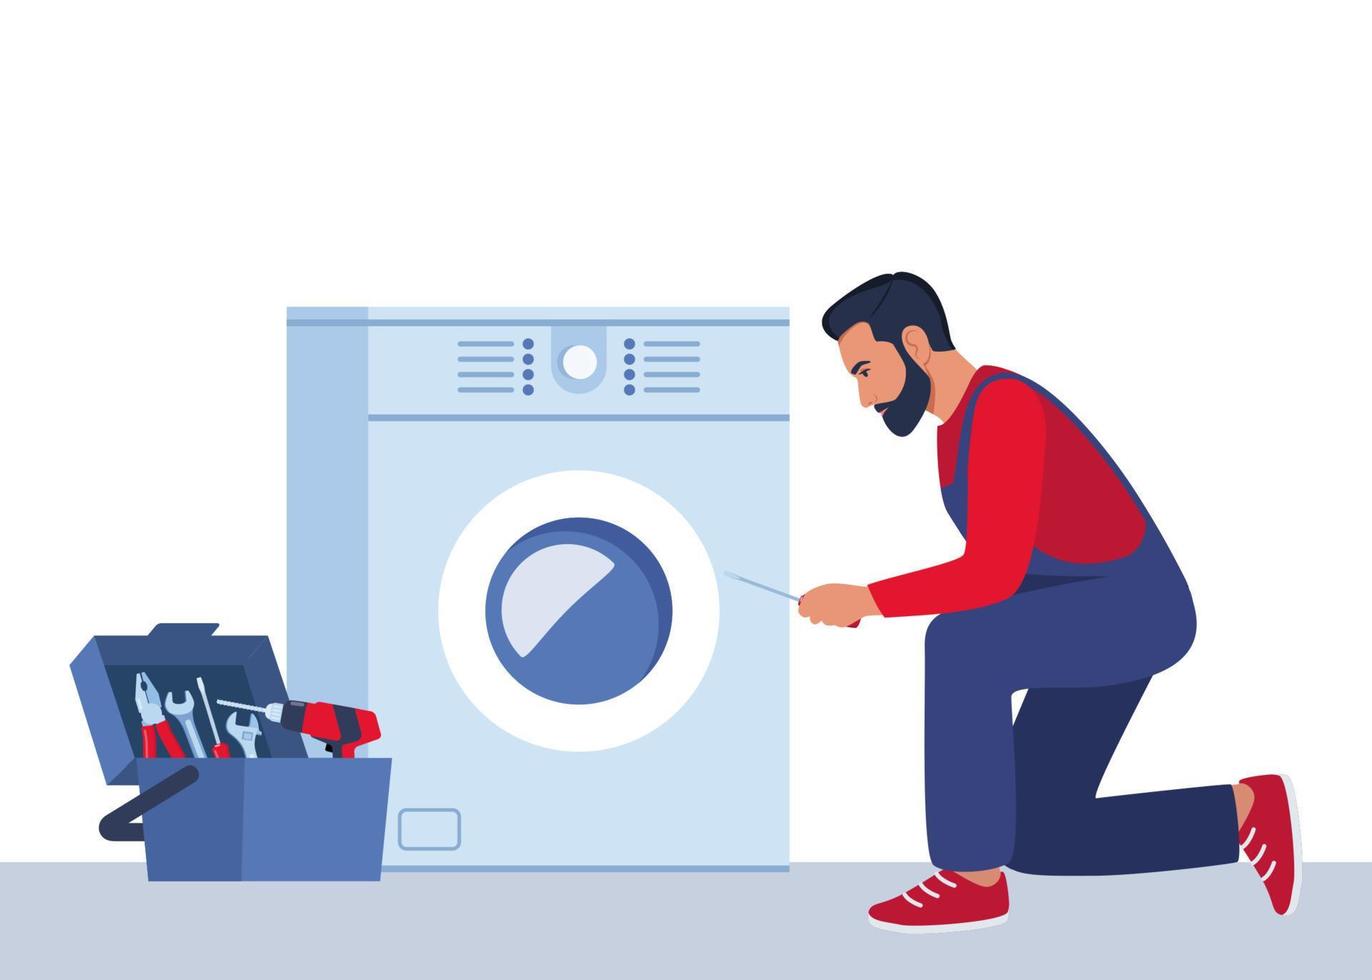 Master with set of professional tools repairs a washing machine. Washing machines repair service. Man character in uniform and washing machine with a breakdown. Vector illustration.